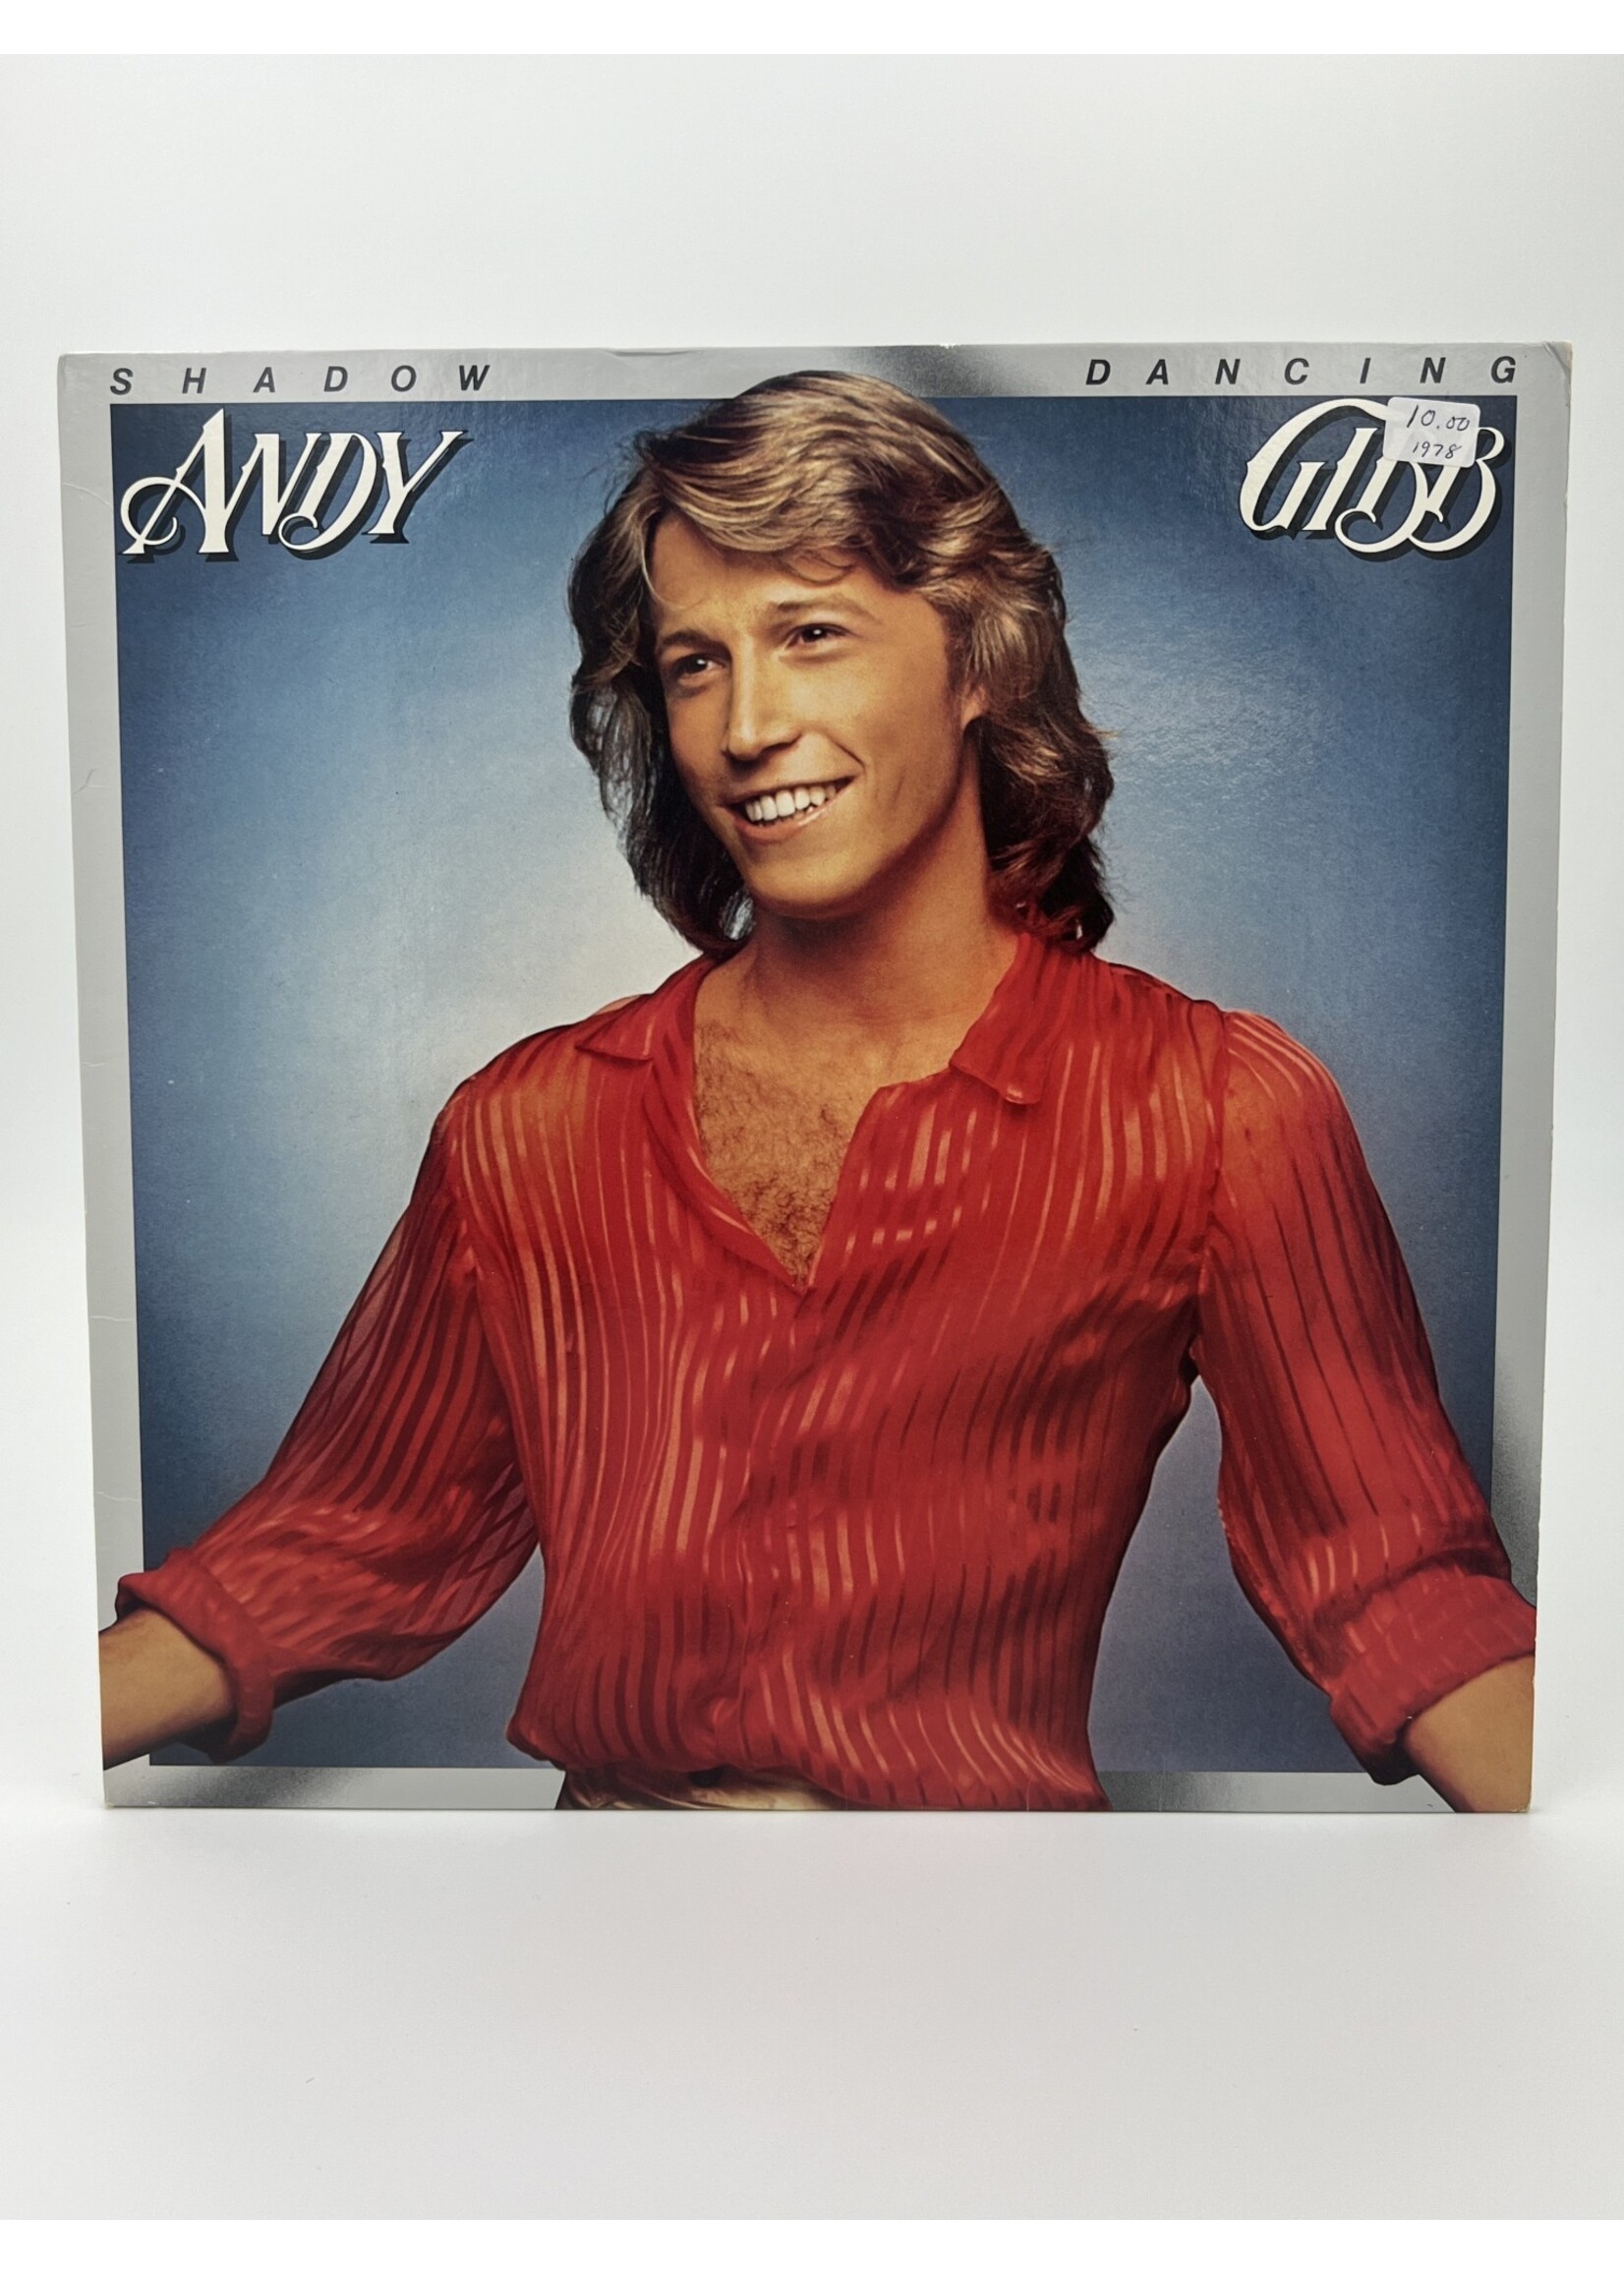 LP Andy Gibb Shadow Dancing LP Record